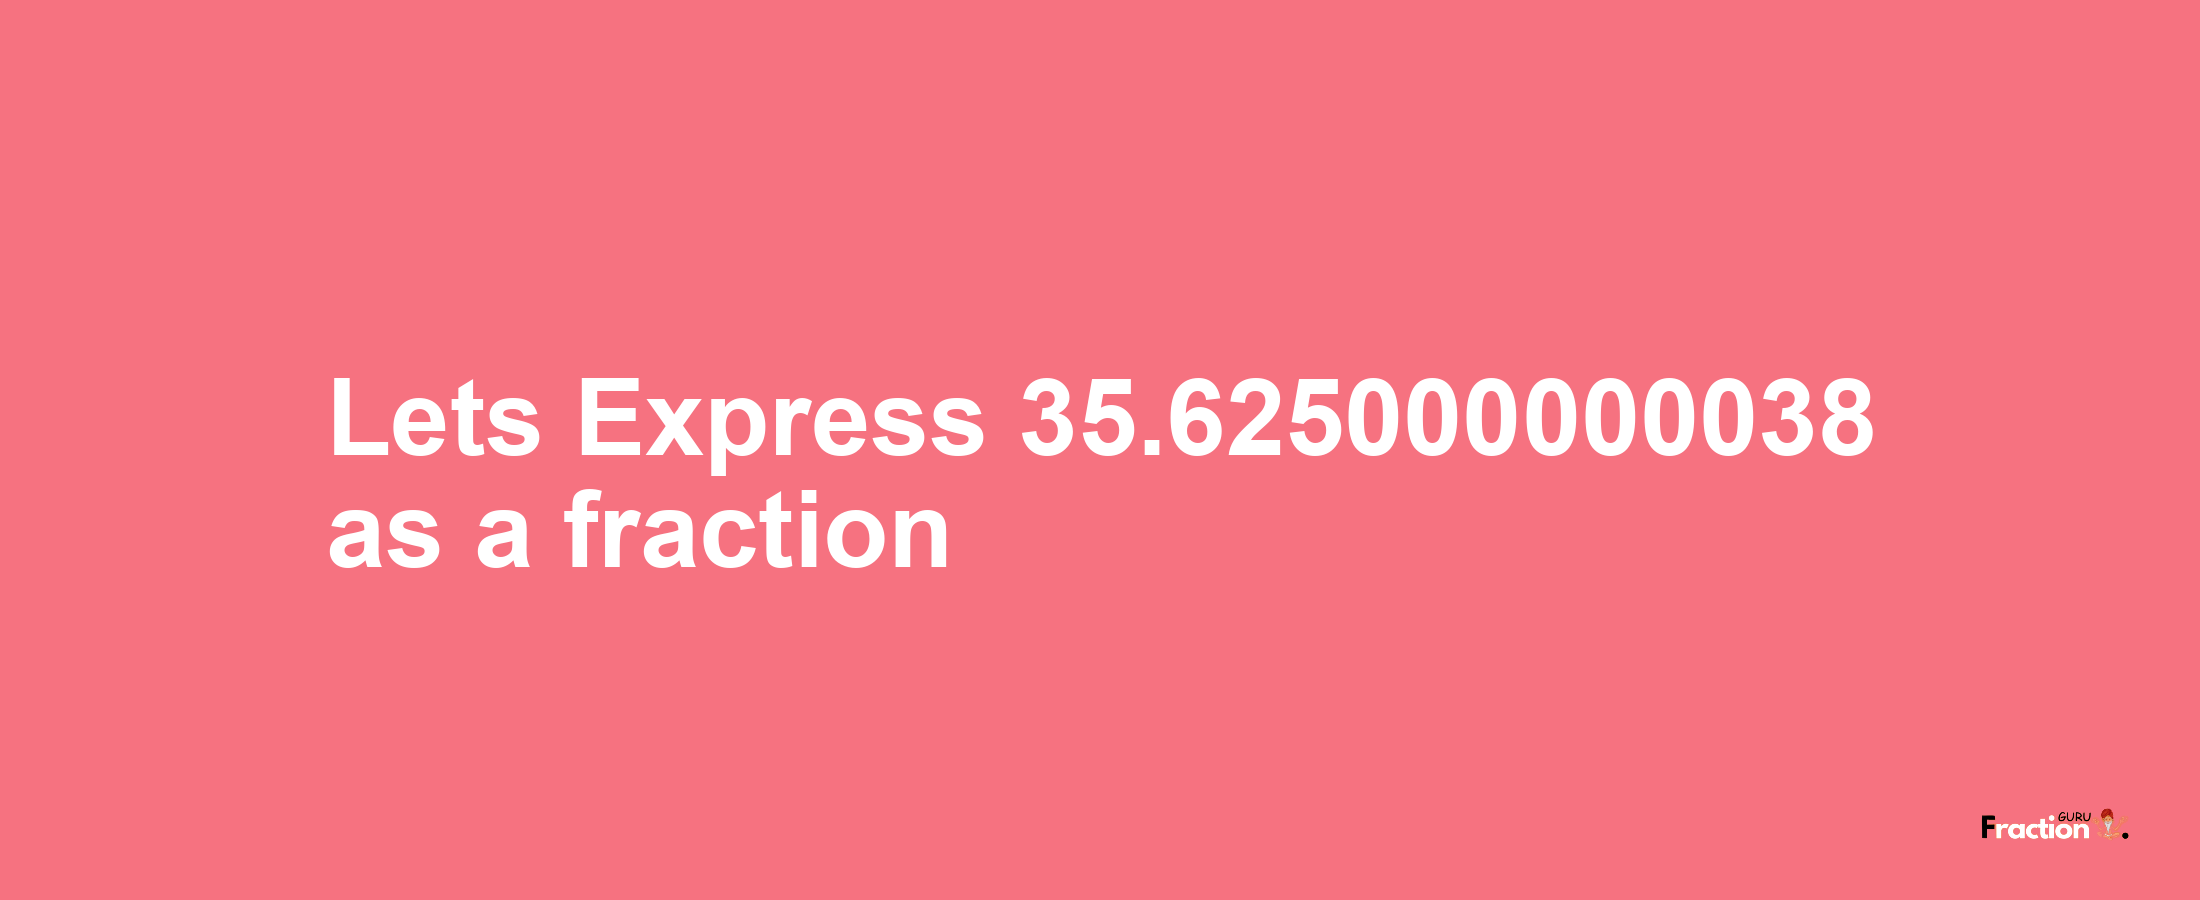 Lets Express 35.625000000038 as afraction